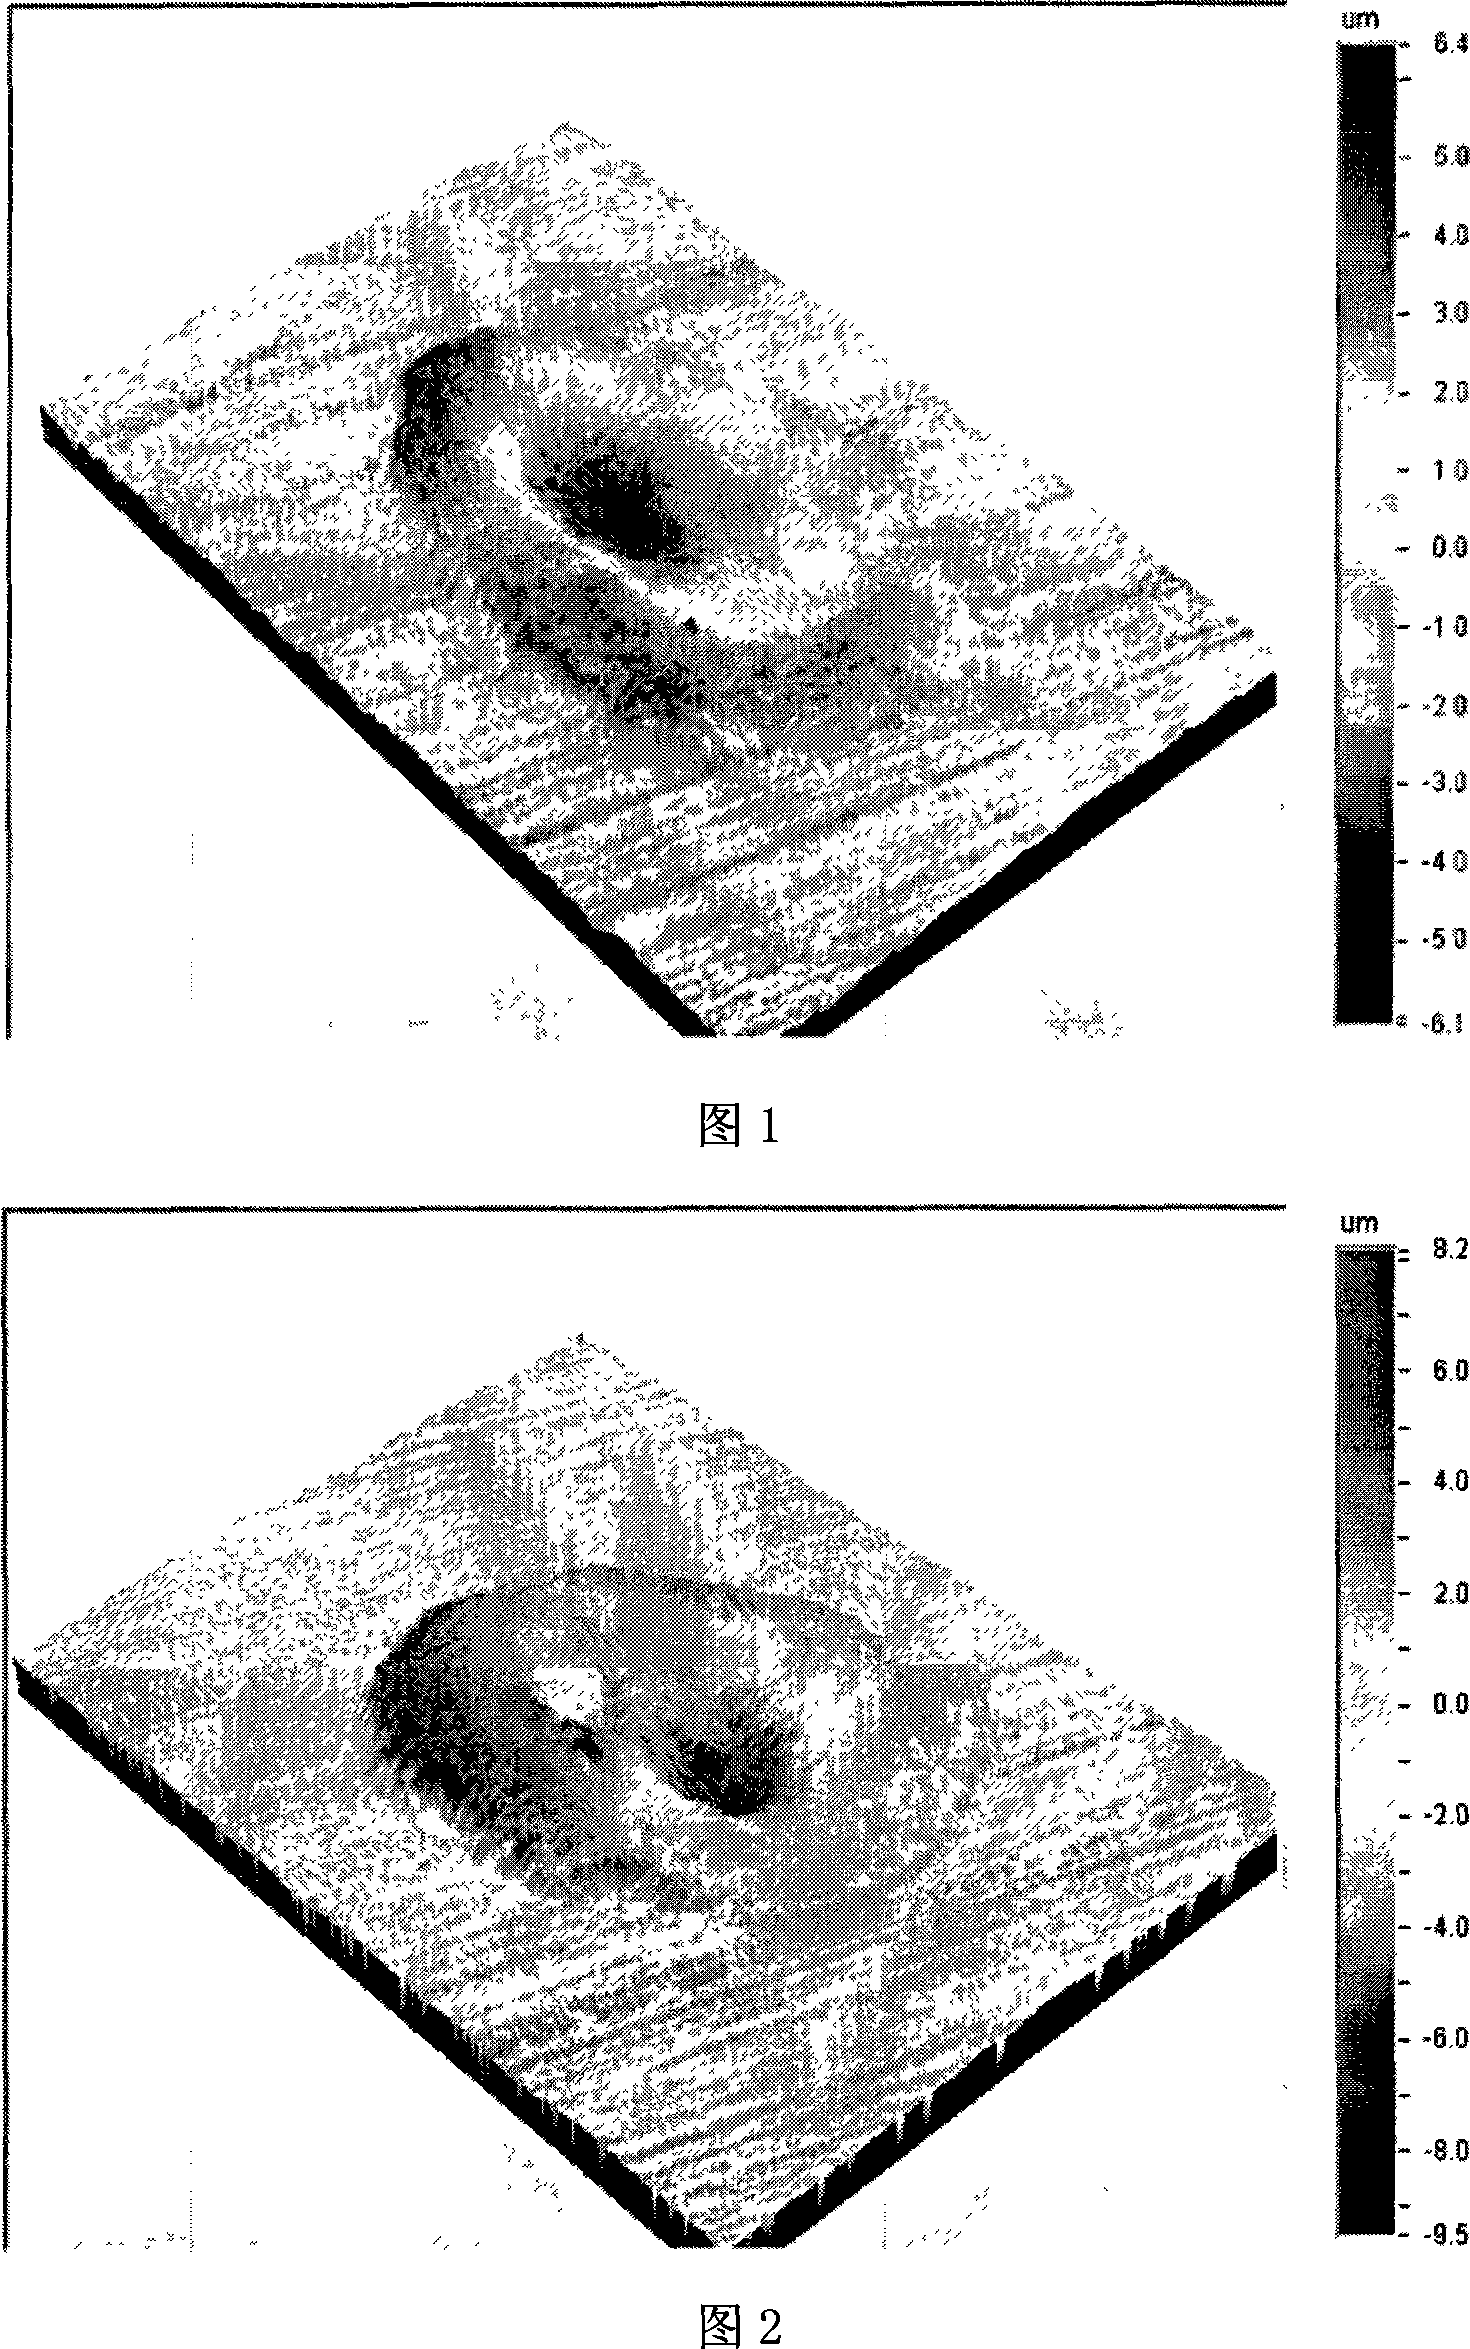 Roller surface laser texturing and micro-alloying composite processing method